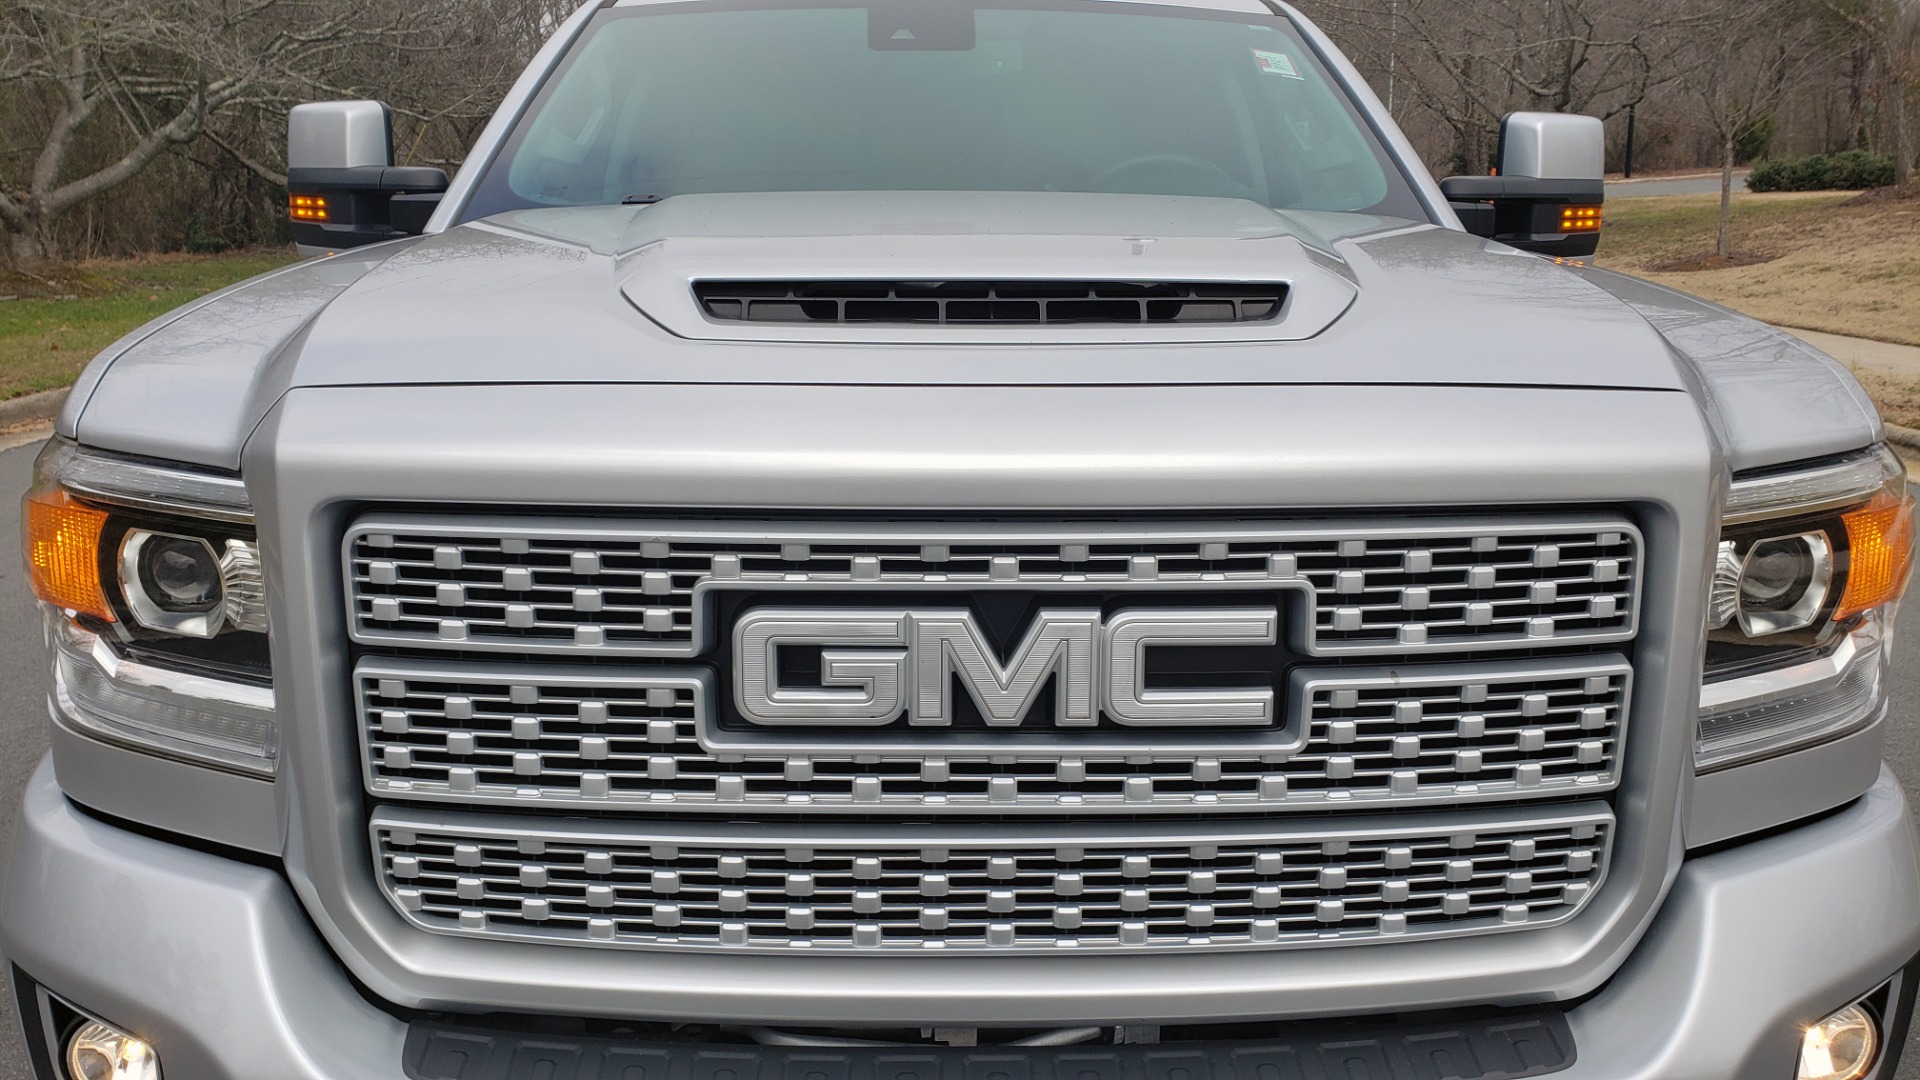 Used 2018 GMC SIERRA 2500HD DENALI 4X4 CREWCAB / 6.6L DURAMAX PLUS / NAV / SUNROOF / REARVIEW for sale Sold at Formula Imports in Charlotte NC 28227 24